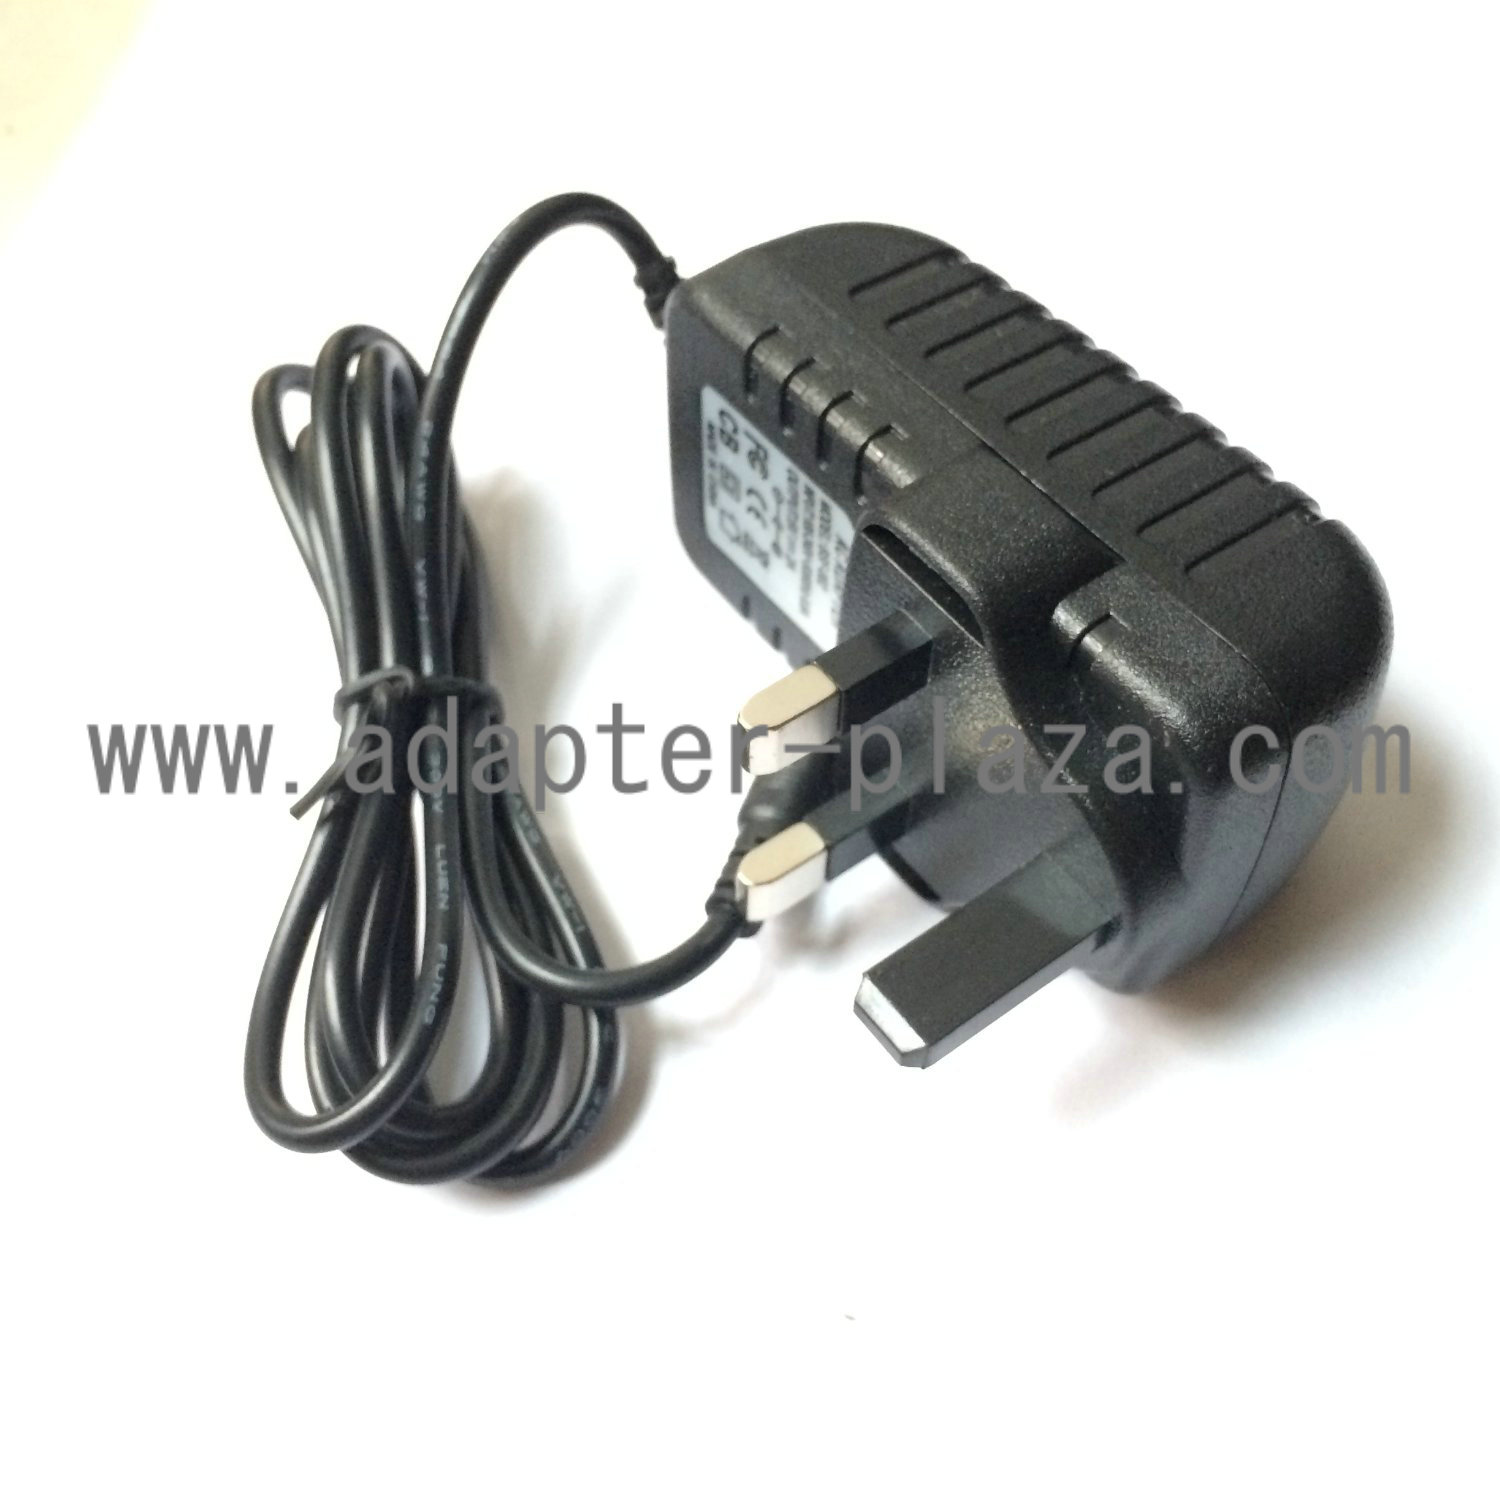 Brand New 9V 1.0A AC/DC Adapter For Casio LK-110 LK-33 Keyboard Charger Power Supply